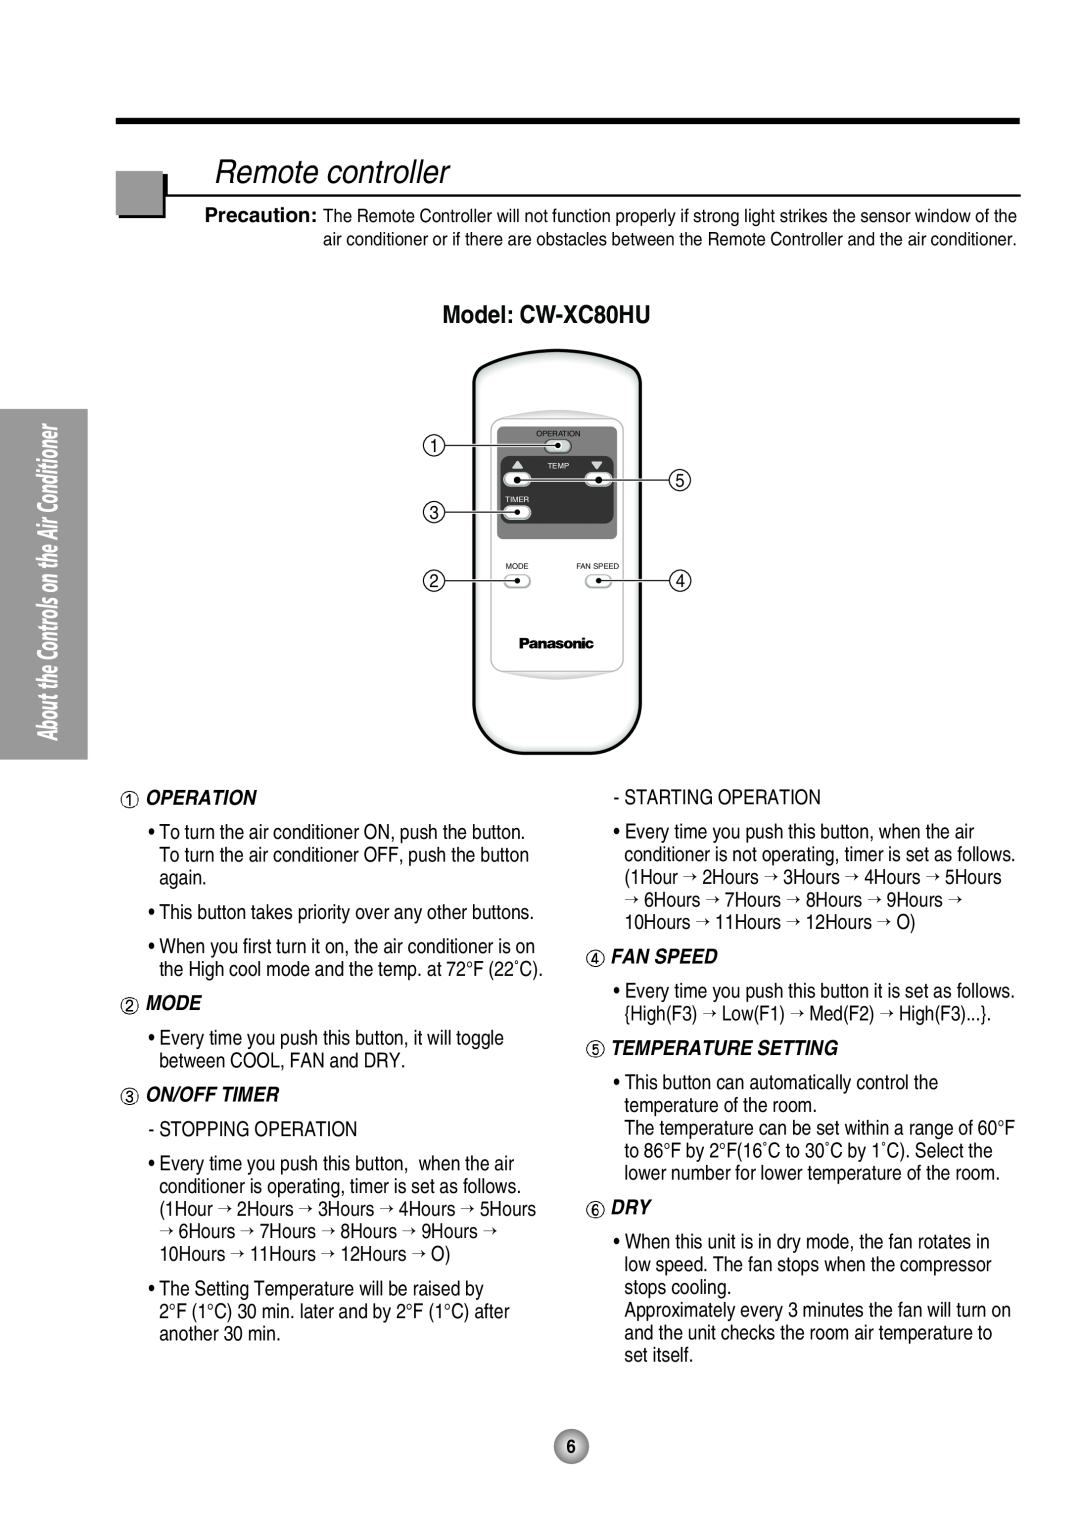 Panasonic manual Remote controller, Model CW-XC80HU, Operation, On/Off Timer, Fan Speed, Temperature Setting 